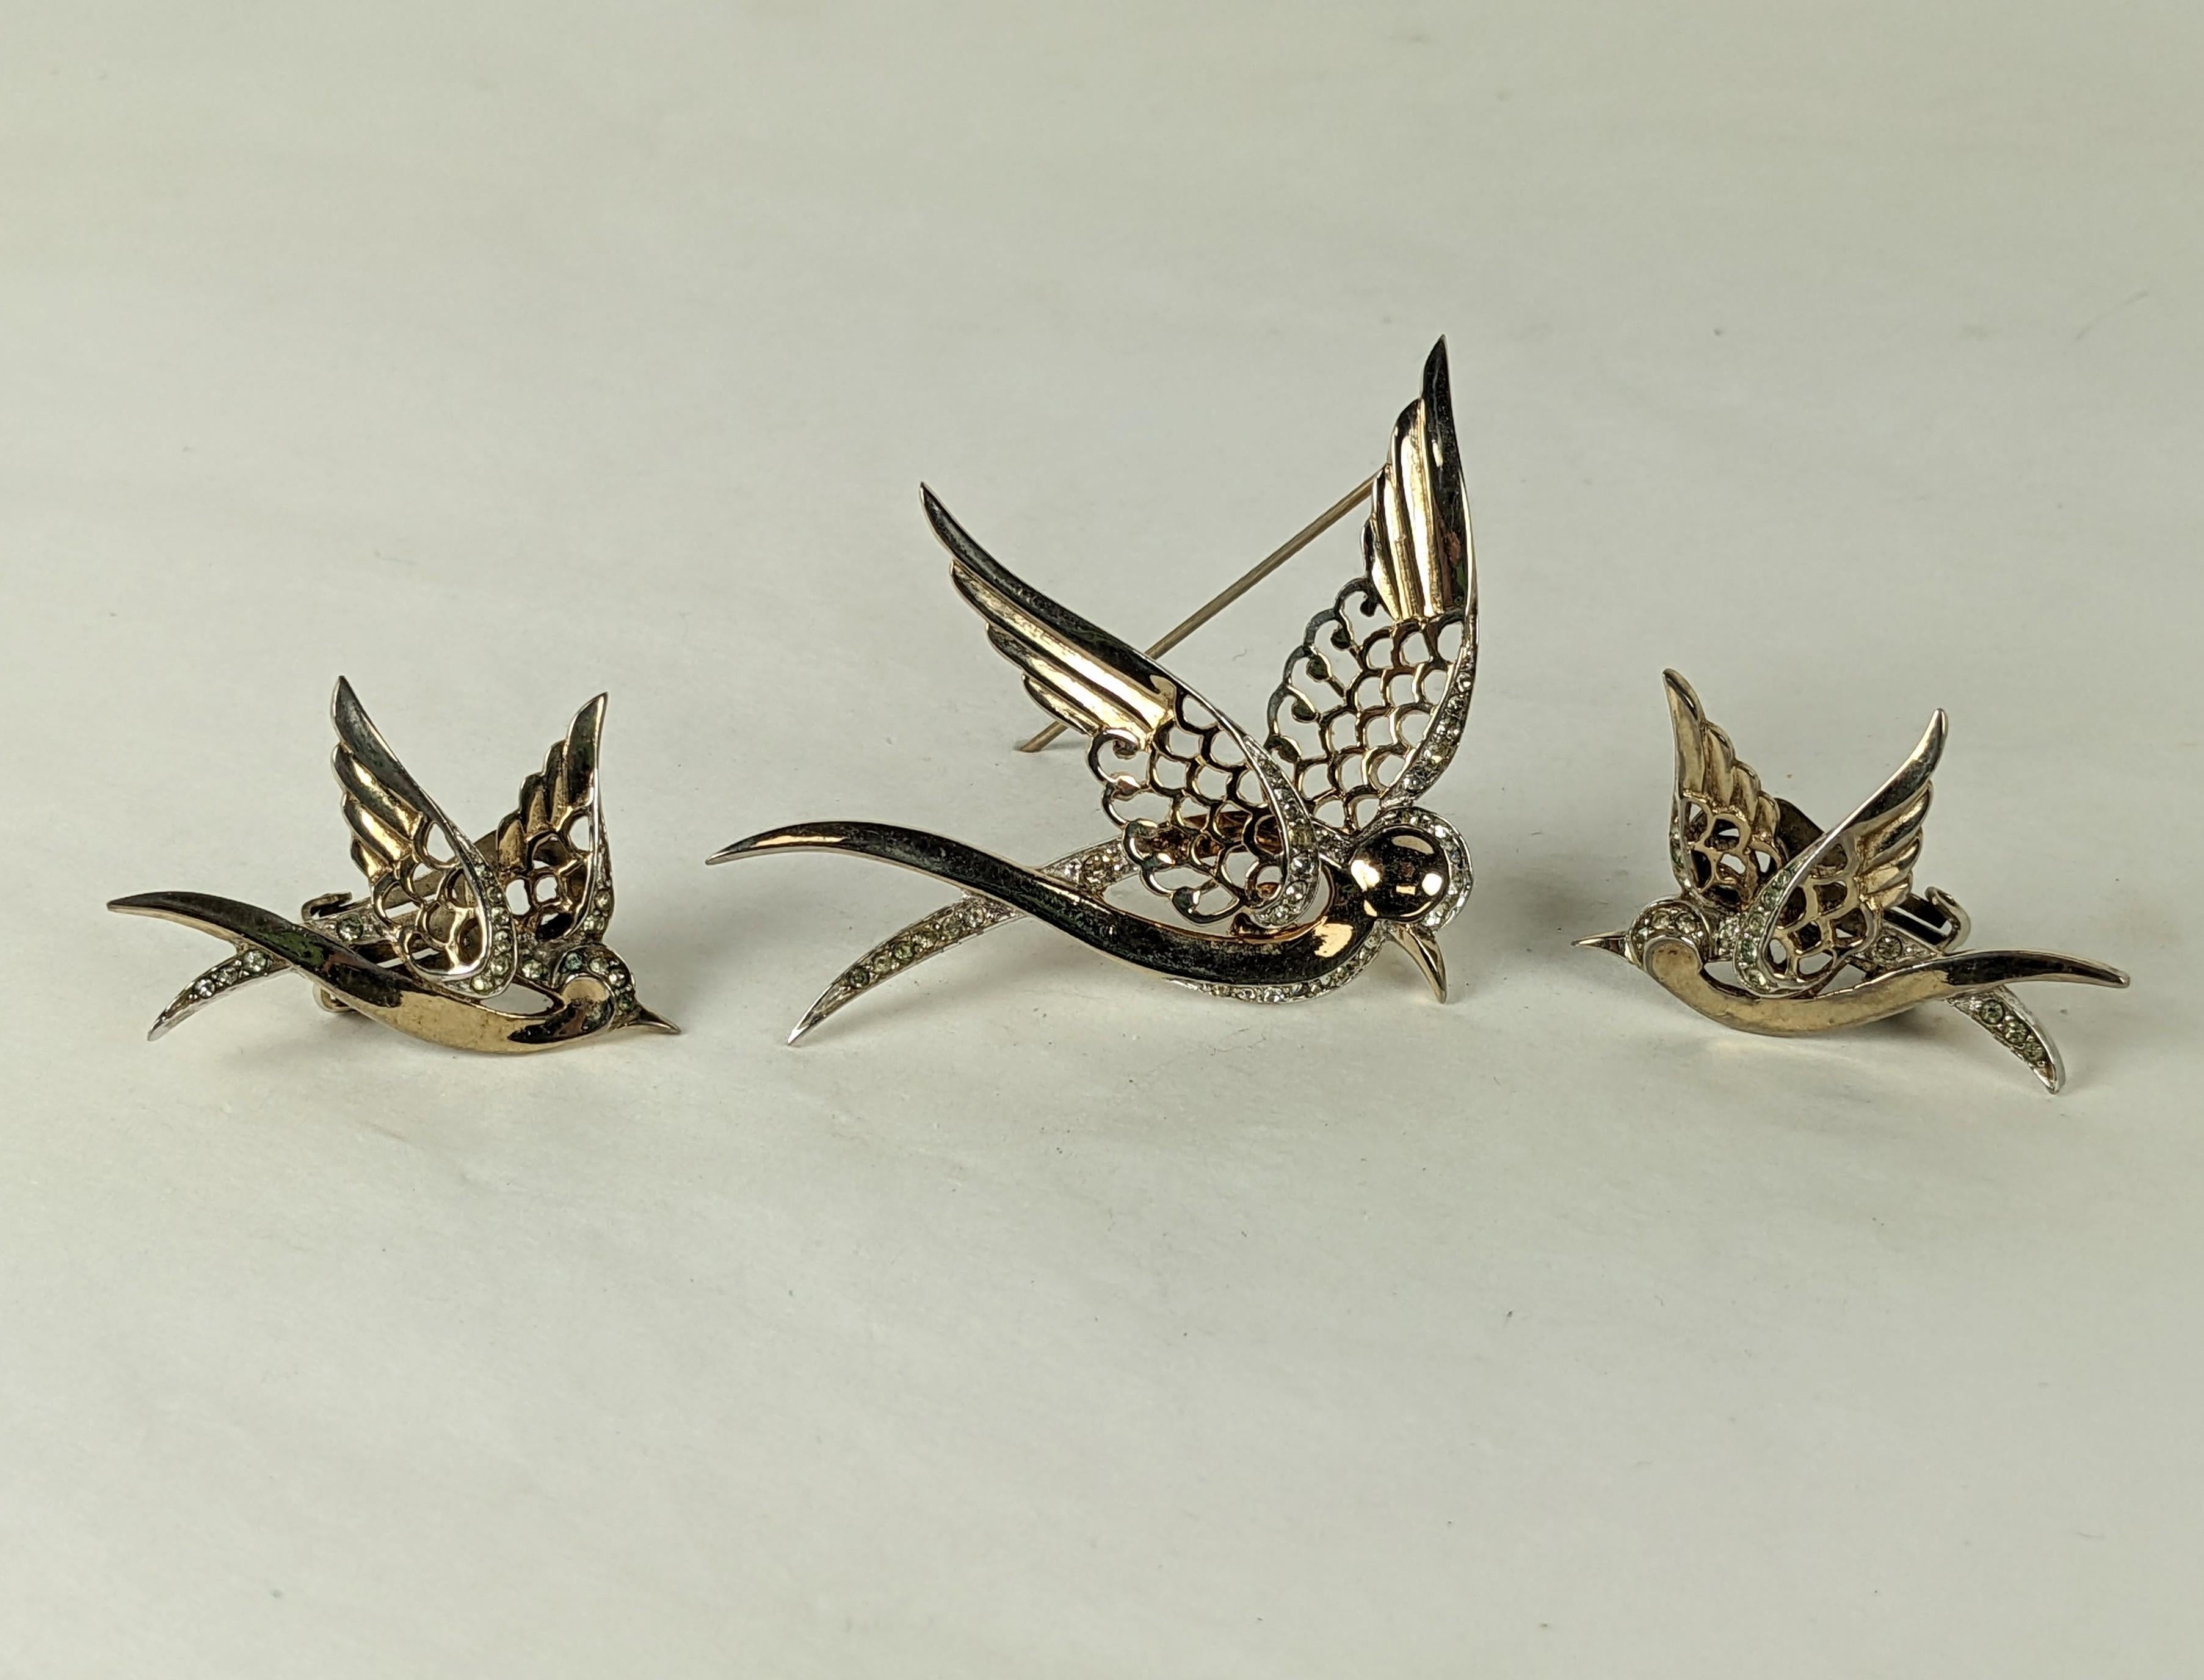 Lovely Marcel Boucher Art Deco Doves Suite from the 1930's. Early MB mark on pierced gold plated dove with pave accents and matching clip bird earrings in flight. 1930's USA. 
Bird length 2.5